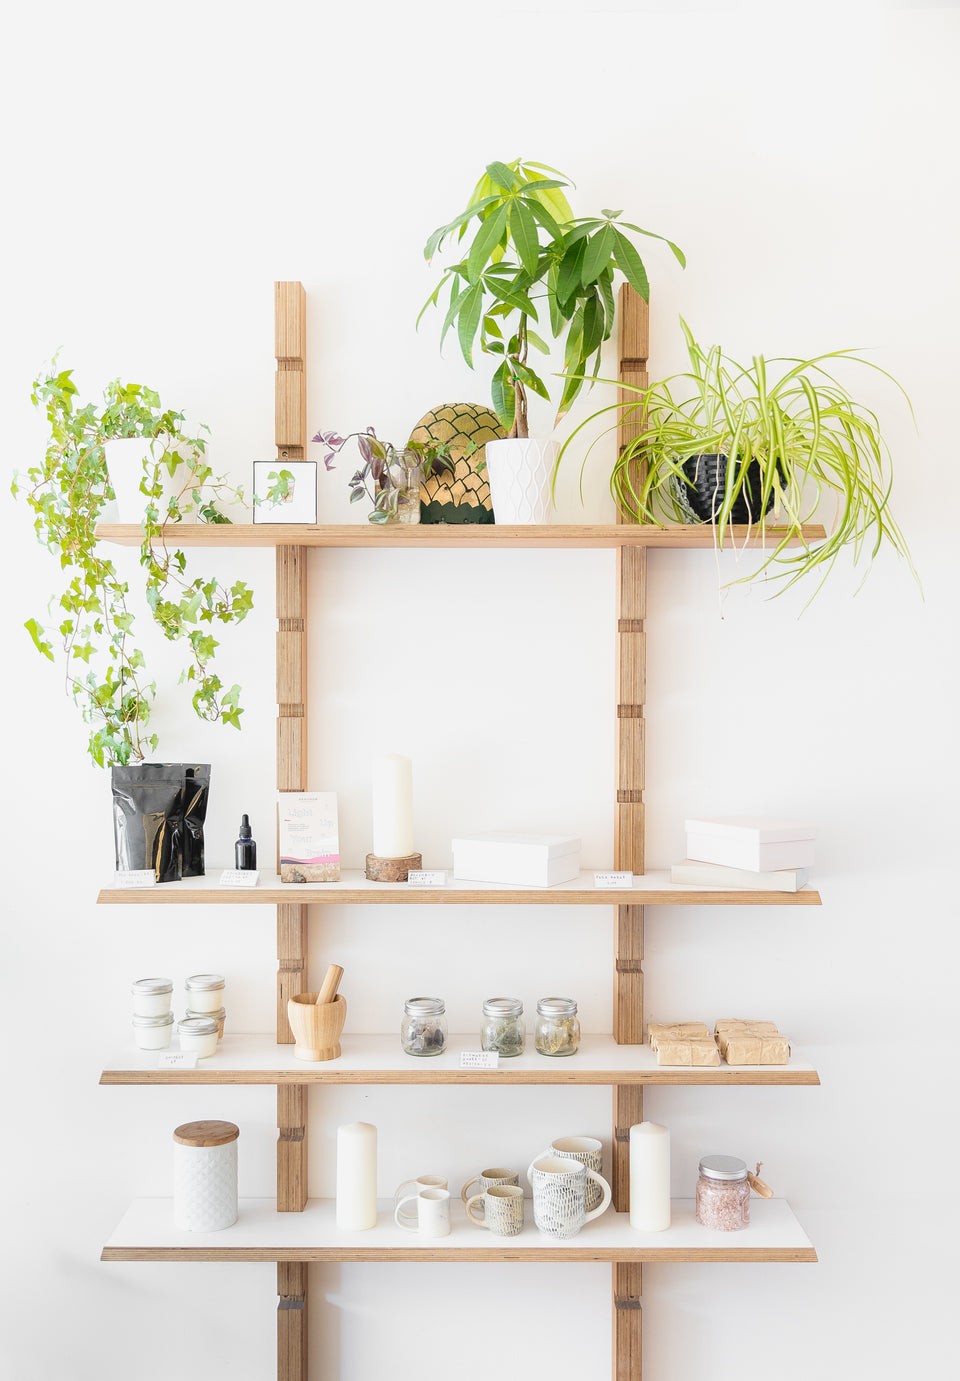 files/a-selection-of-candles-and-plants-on-wooden-shelves.jpg